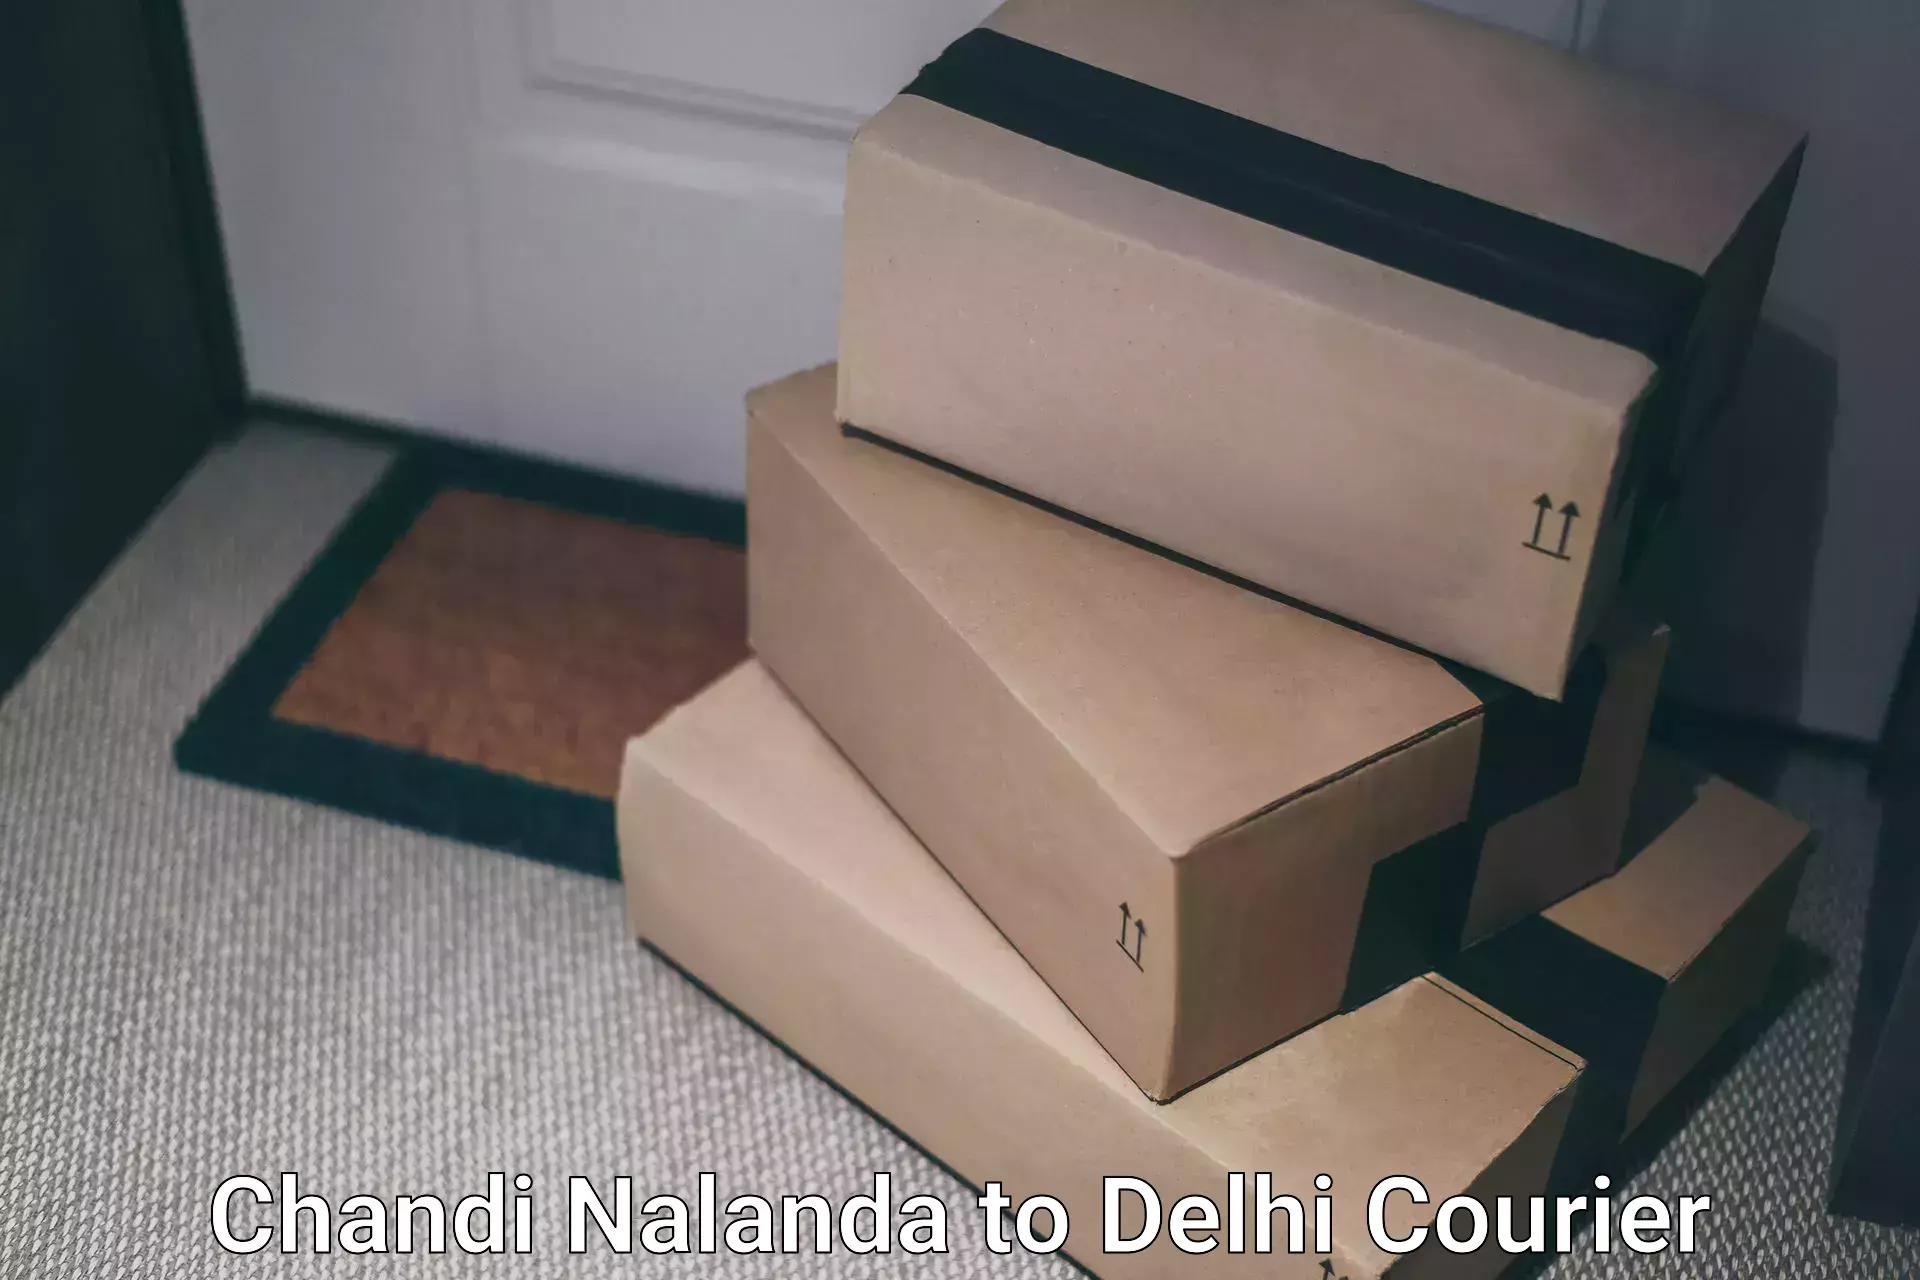 Same-day delivery solutions Chandi Nalanda to Lodhi Road